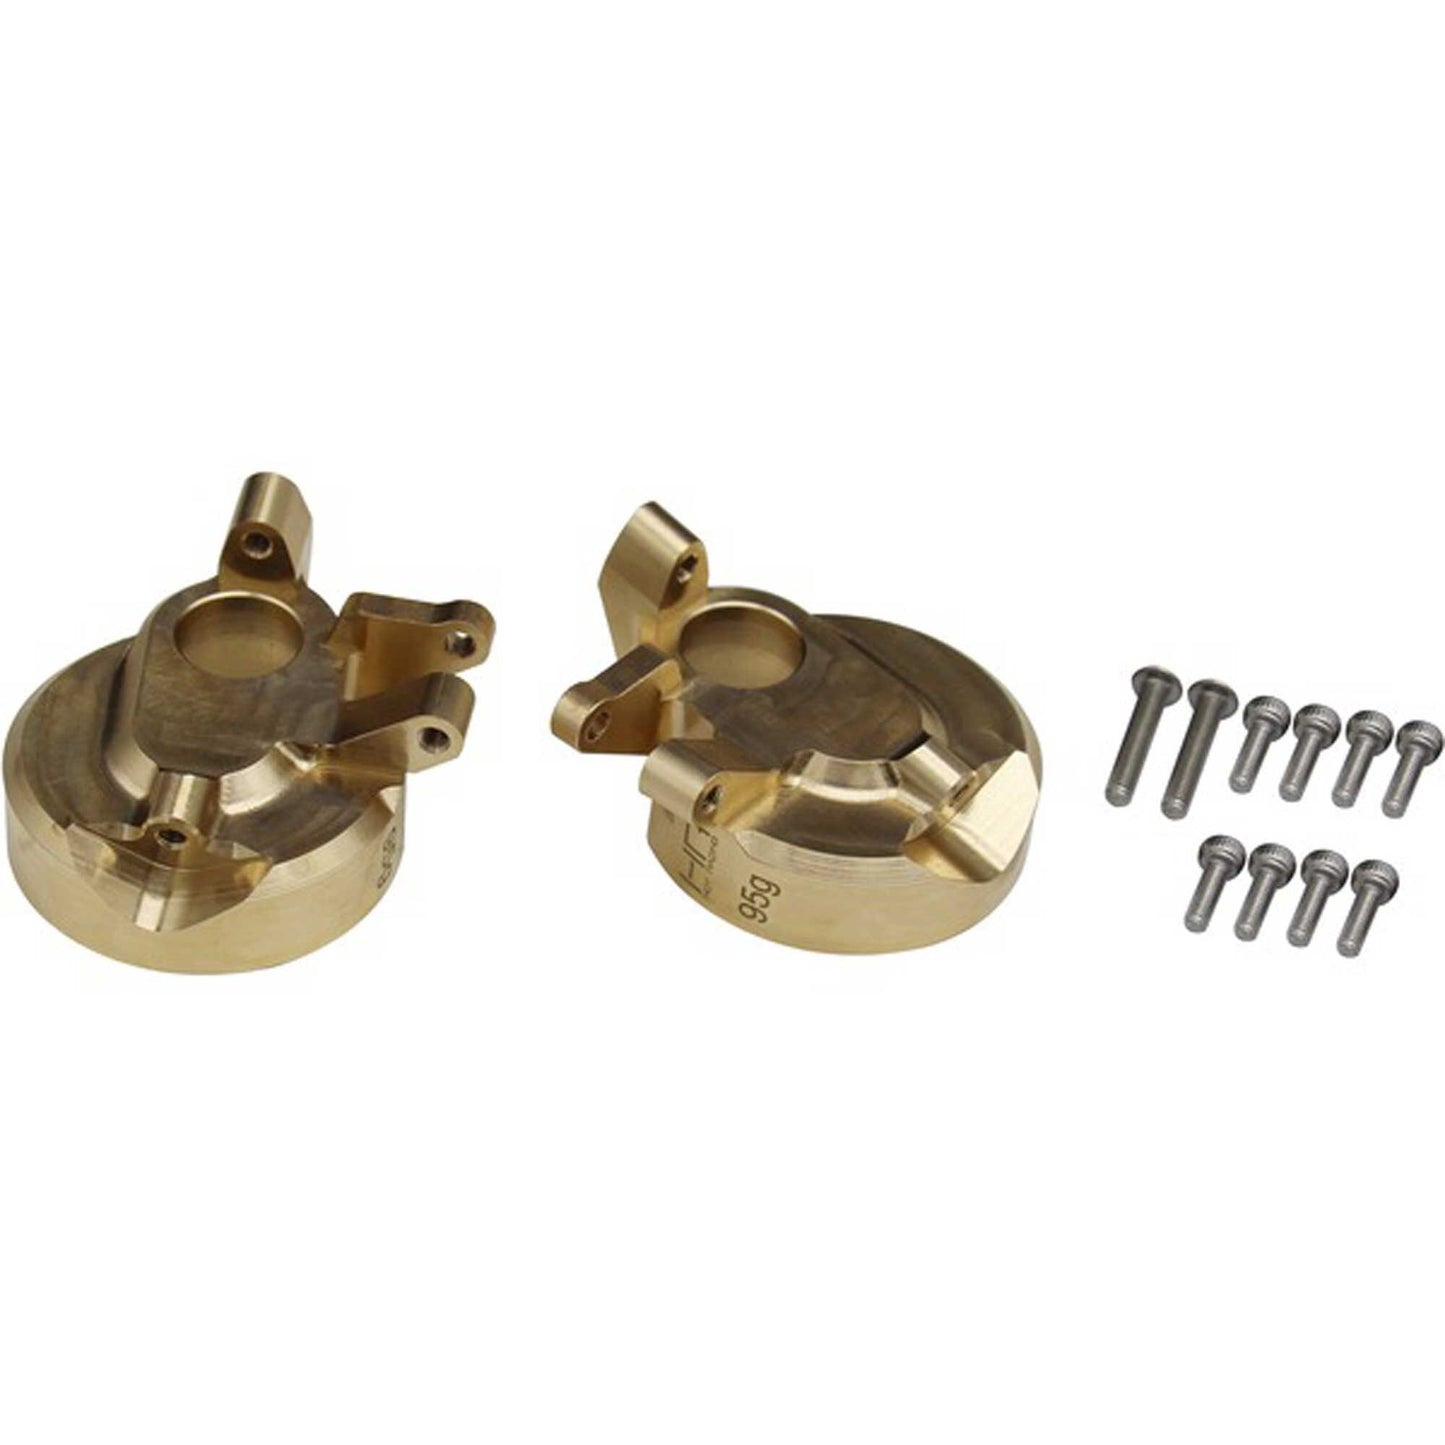 Hot Racing Brass Currie F9 Portal Steering Knuckle: Axial UTB